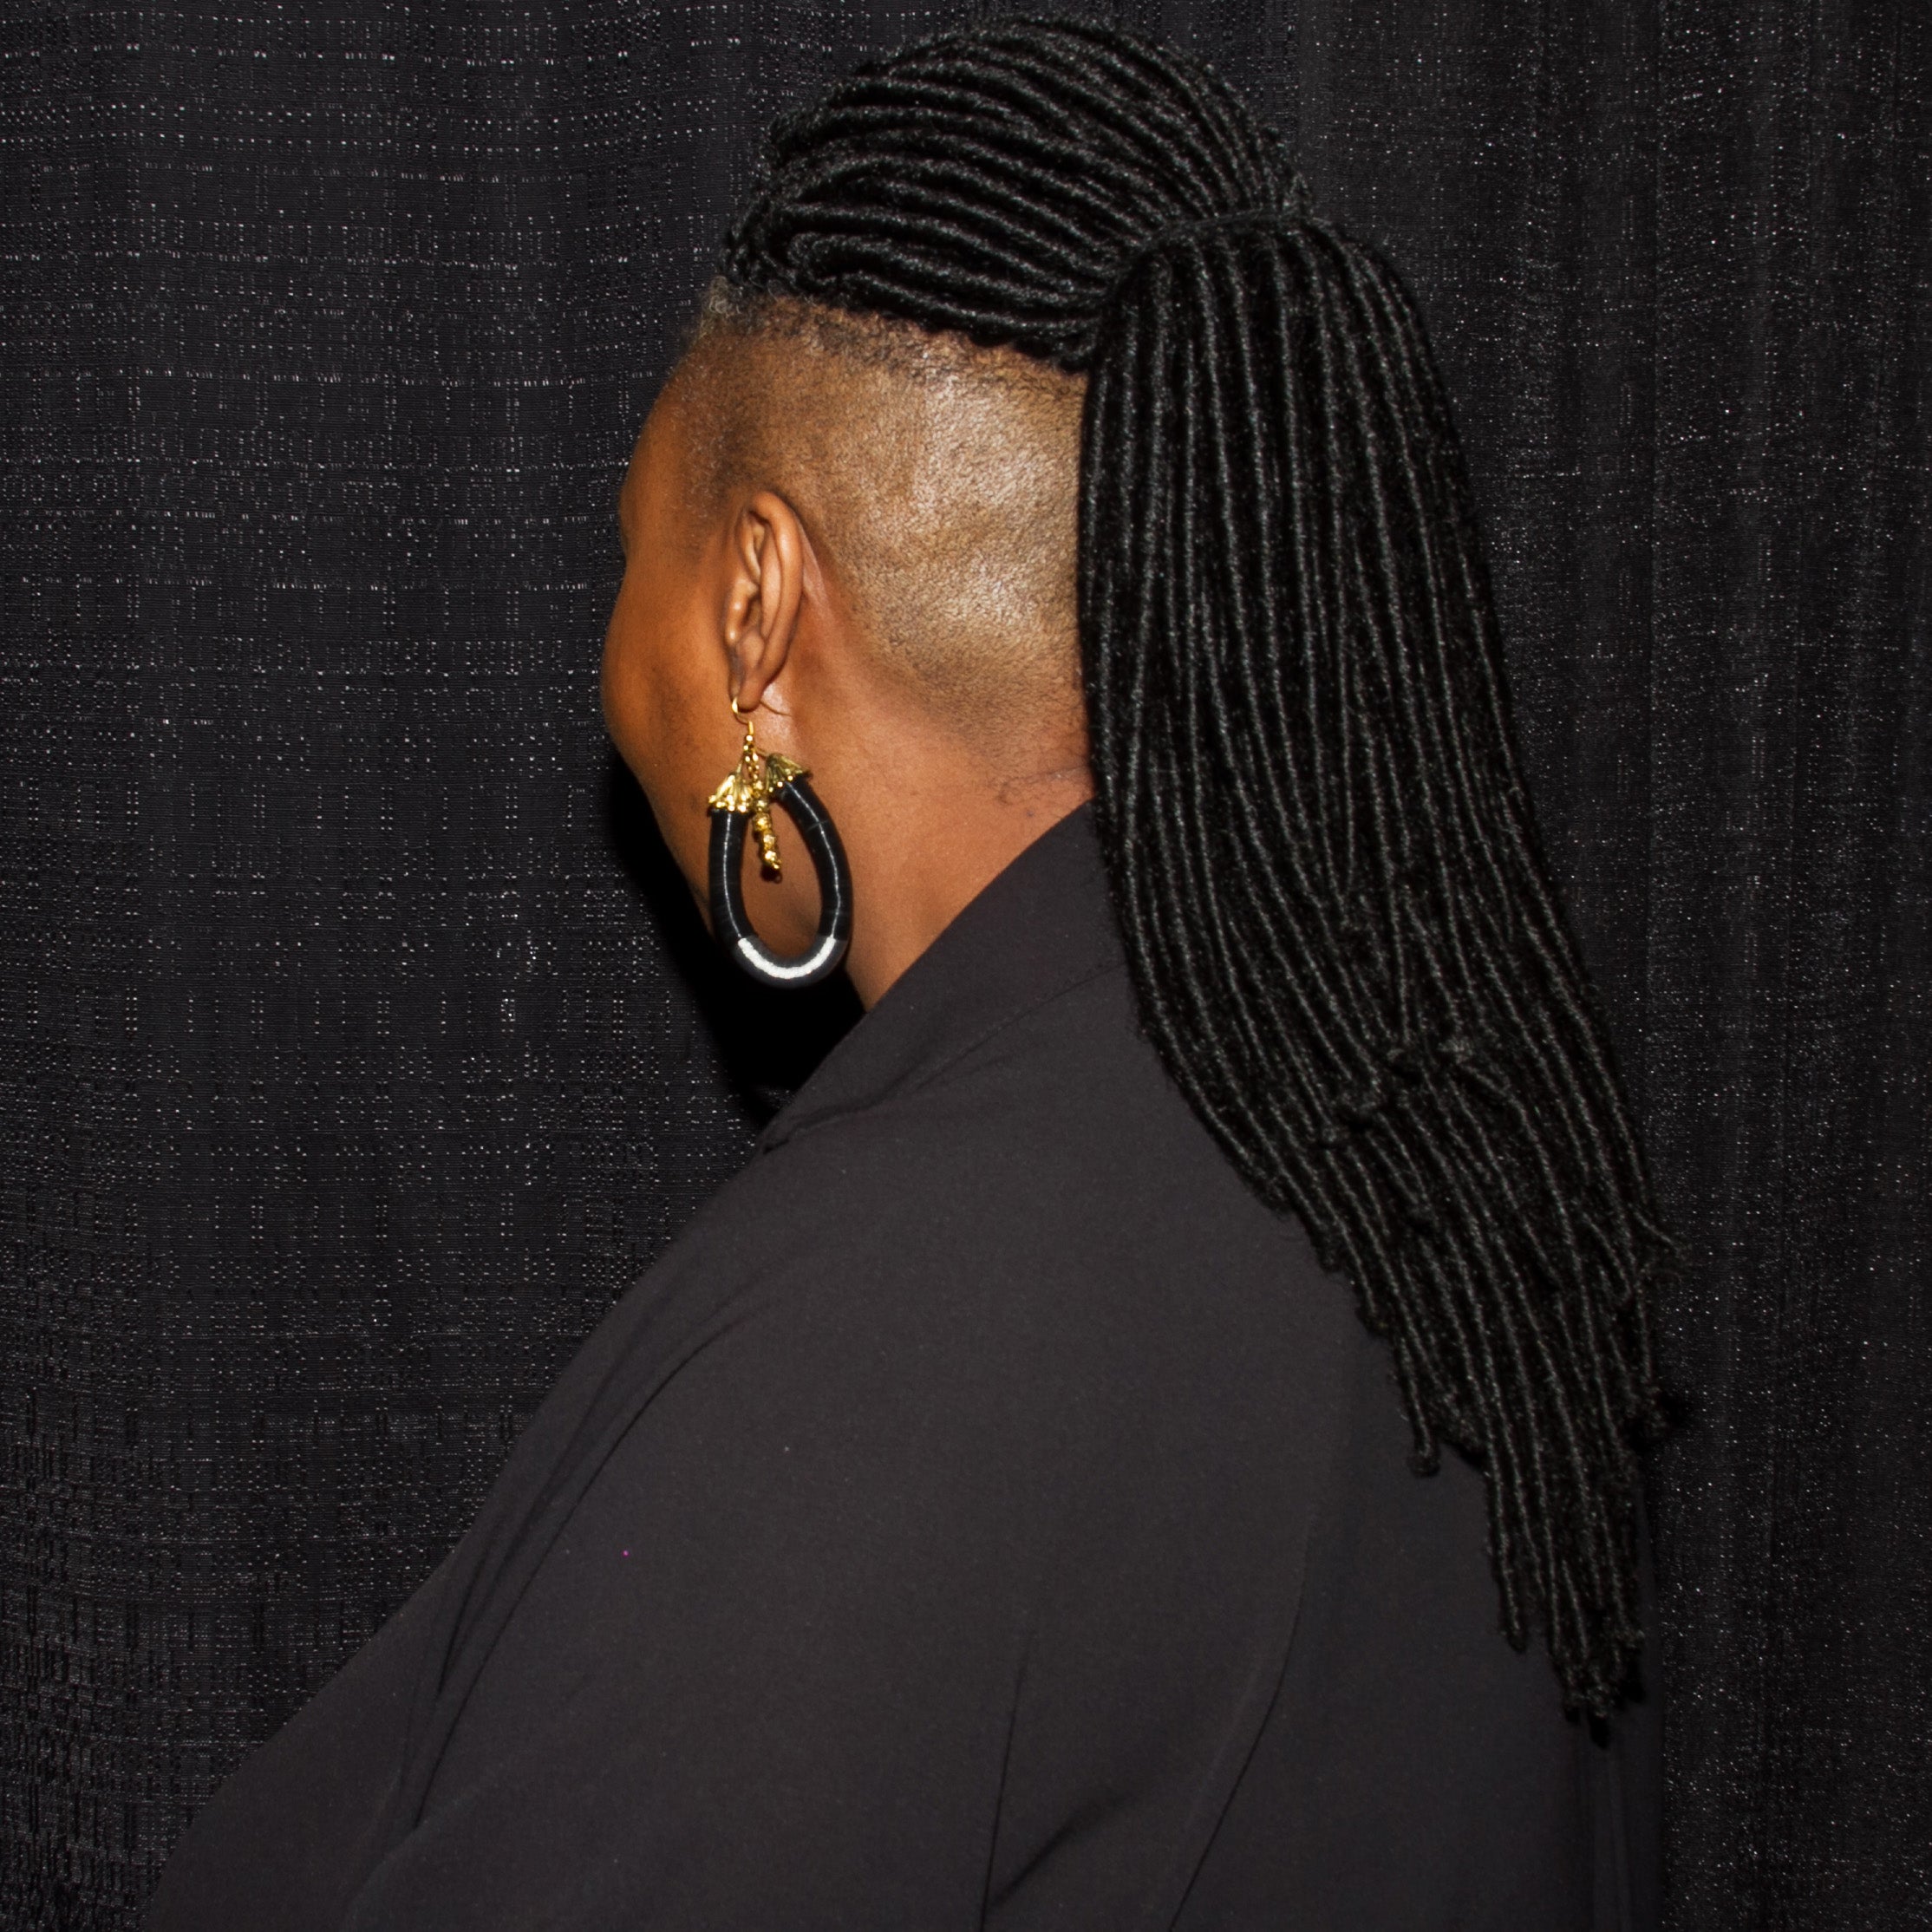 35 Must-See Hairstyles From The International Hair and Beauty Show
